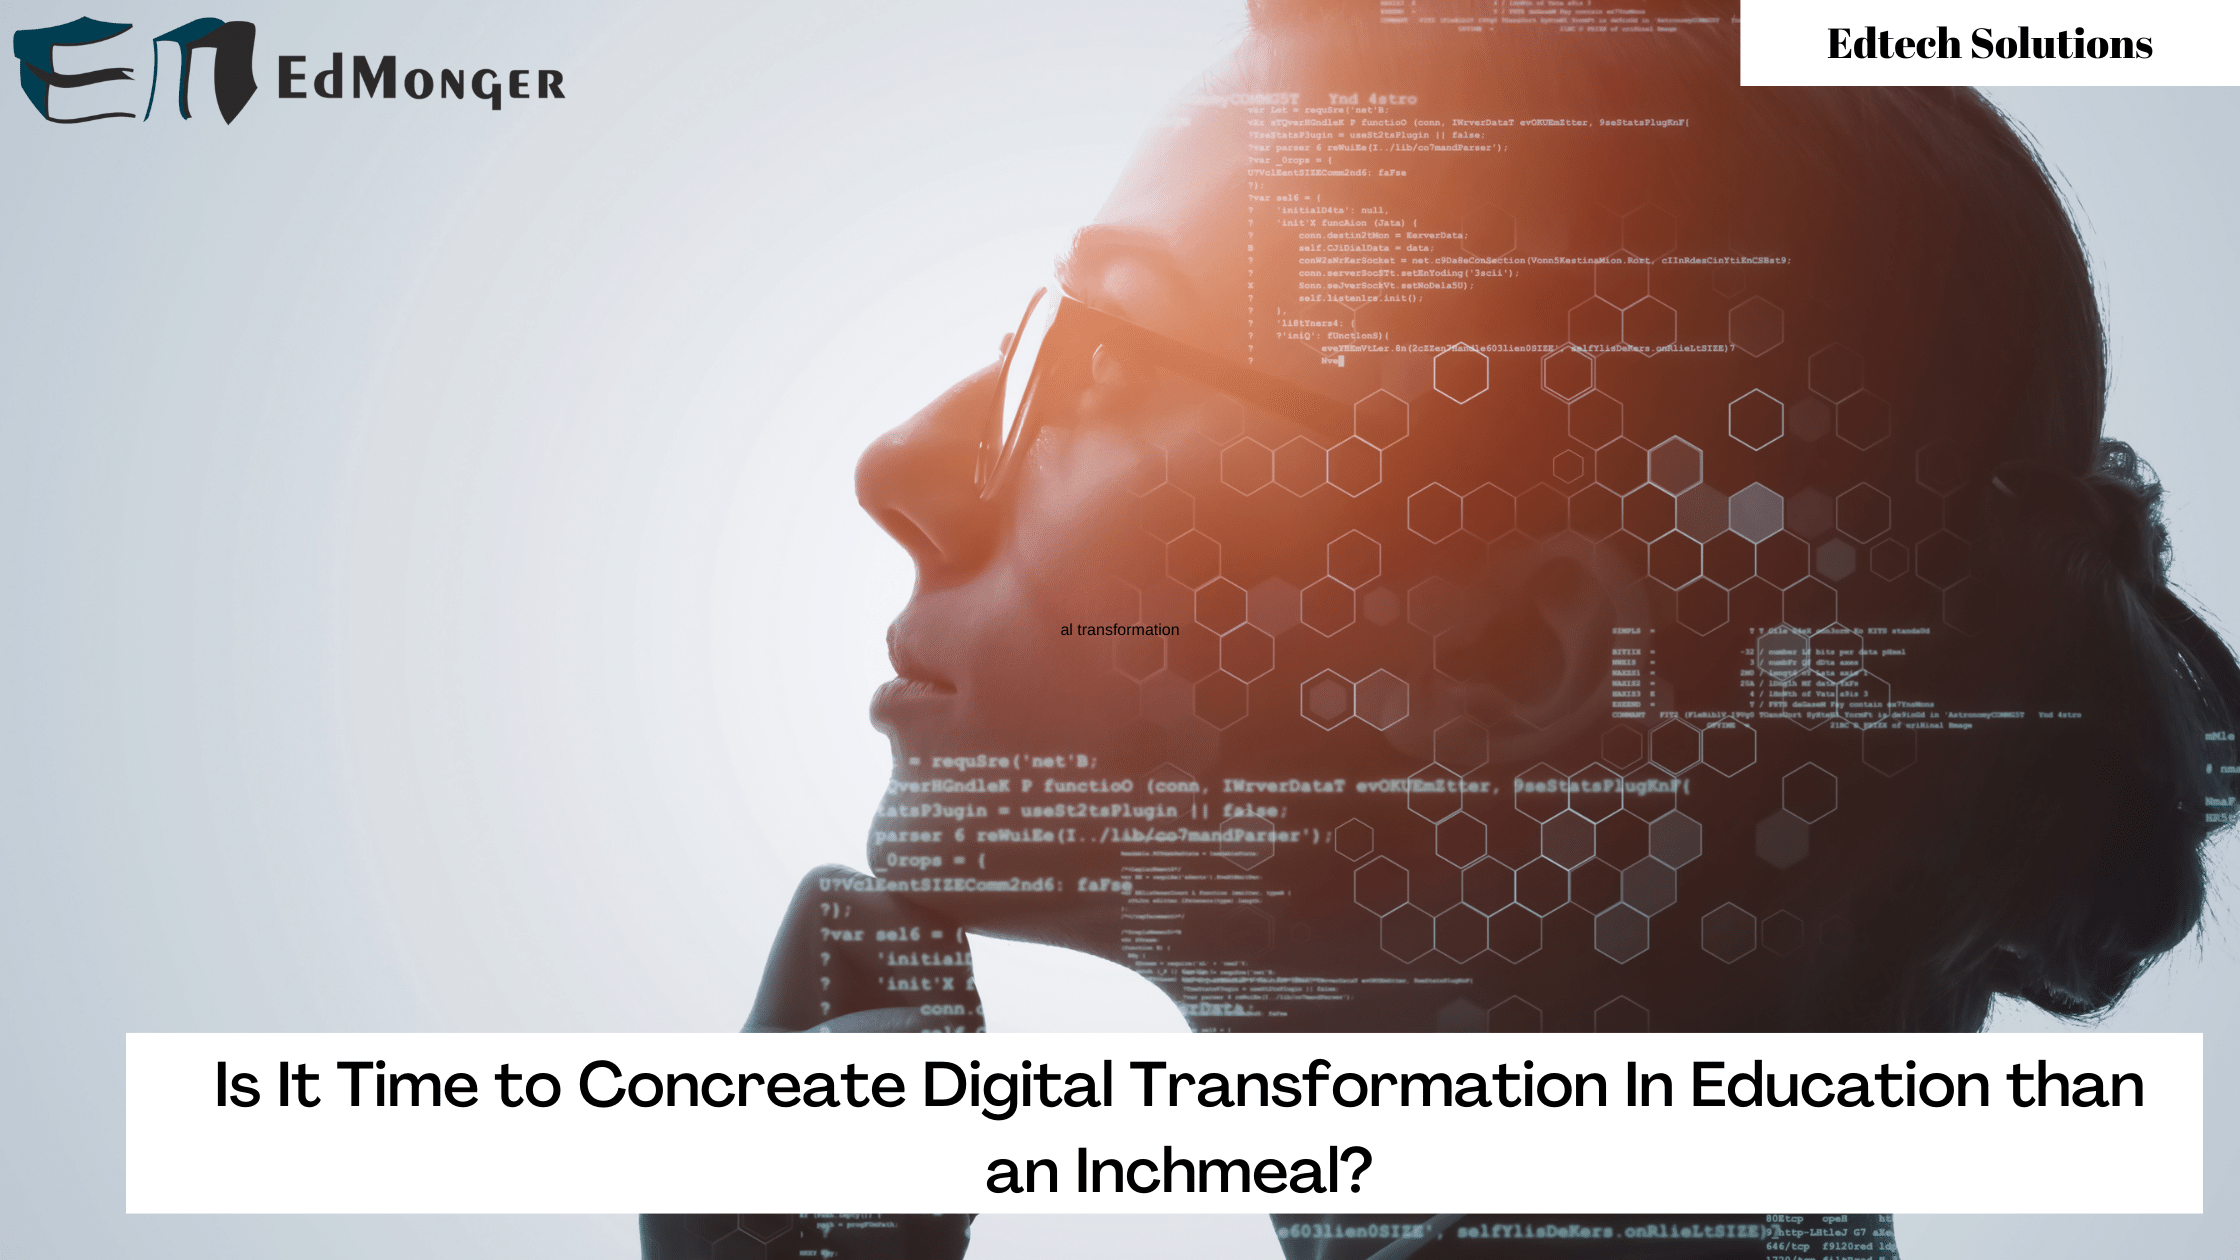 Time for a Digital Transformation in Education than an Inchmeal?